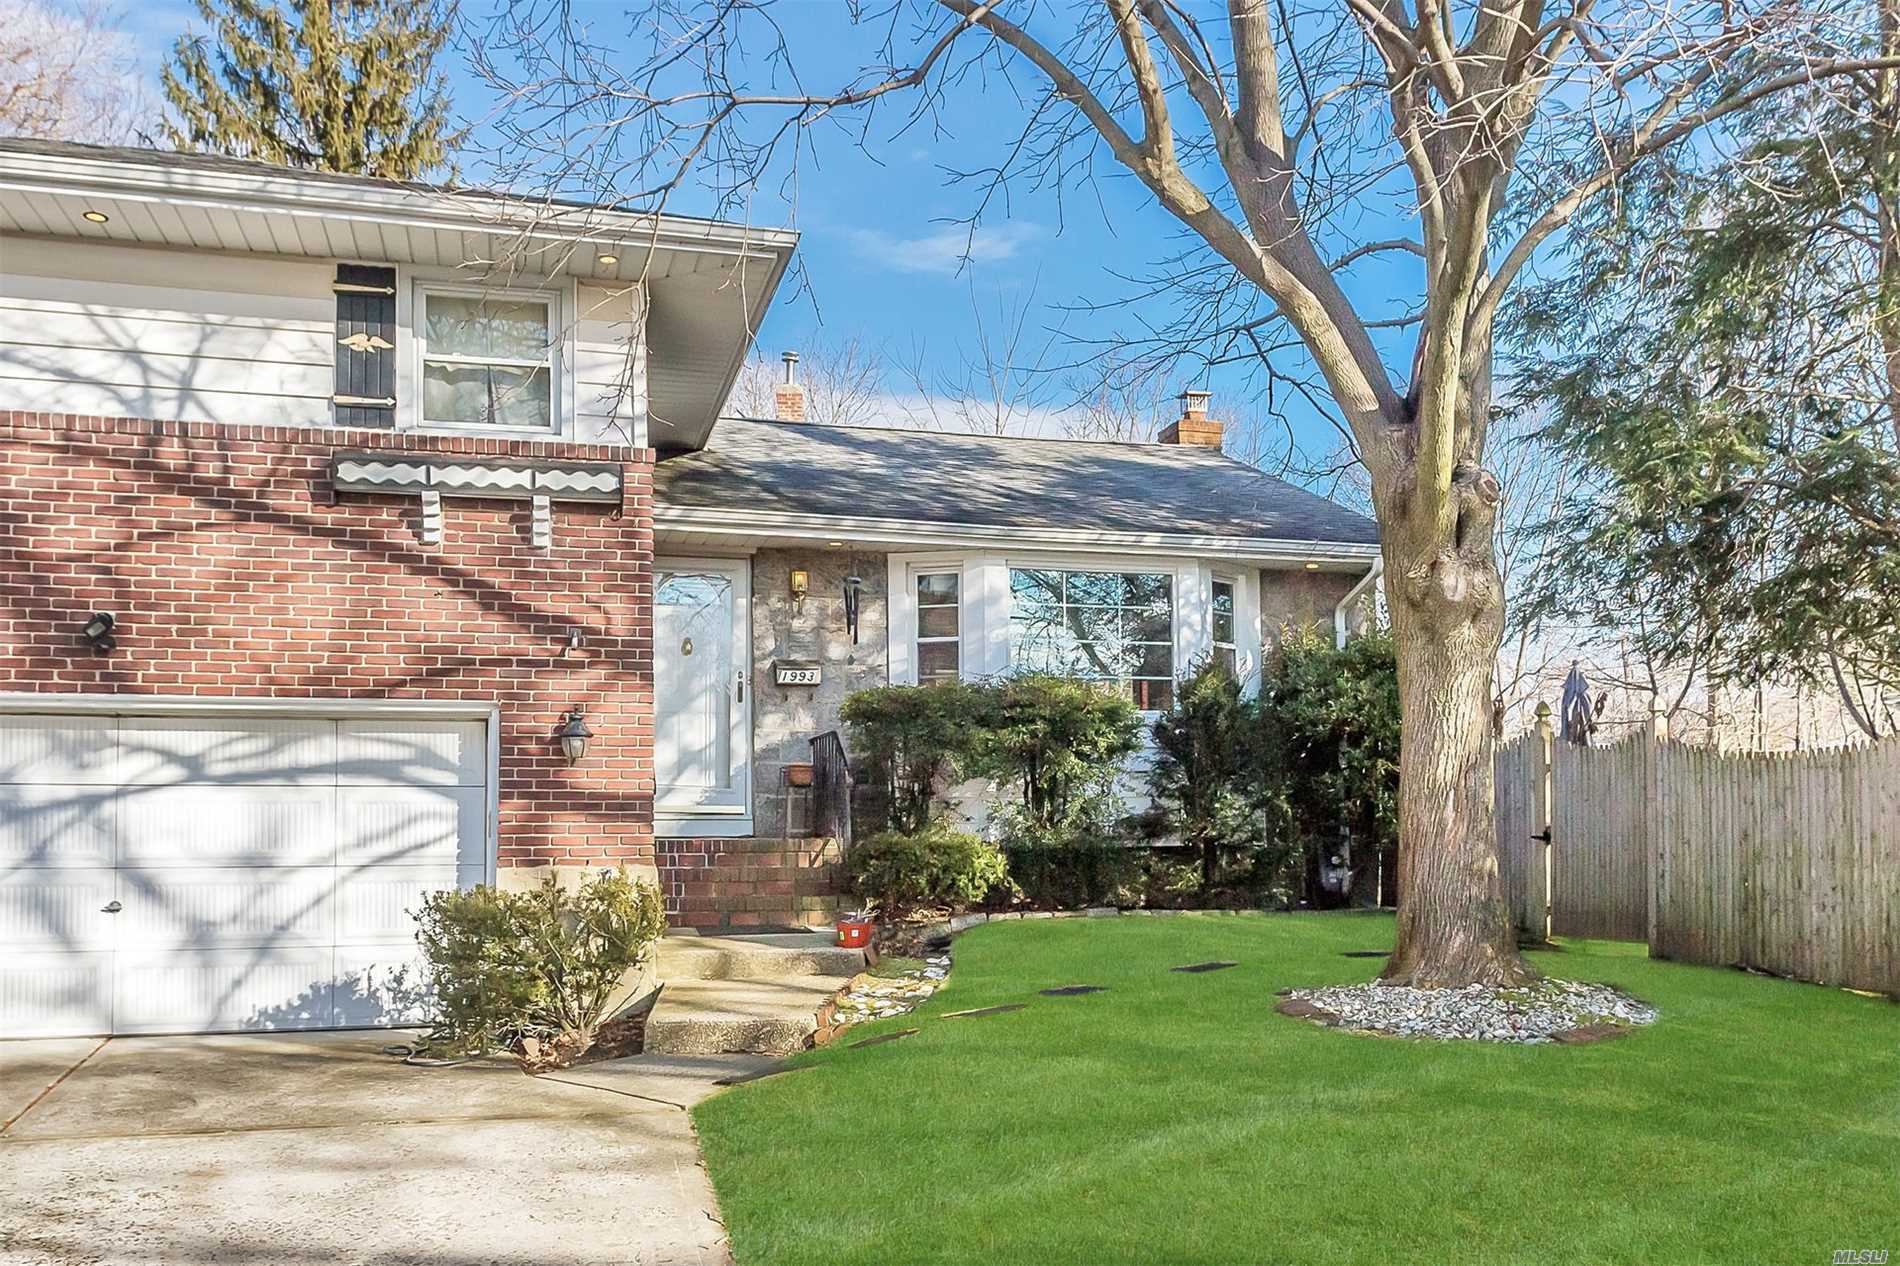 Beautiful 4 Level 3 Bdrm 2 1/2 Bath Merrick Manor Split On A Cul-De-Sac On Private, Park-Like Grounds! Eik, Living Rm W/Gas Fireplace, Fdr, Hardwood Floors, Den W/1/2 Bath, Finished Basement. Updates Include: 2013 Gas Heating System, Hw Heater, 200 Amp Electric, 2016 Cac Compressor, 2008 Updated Bathrooms, Windows In Living And Dining Rm. Won&rsquo;t Last!